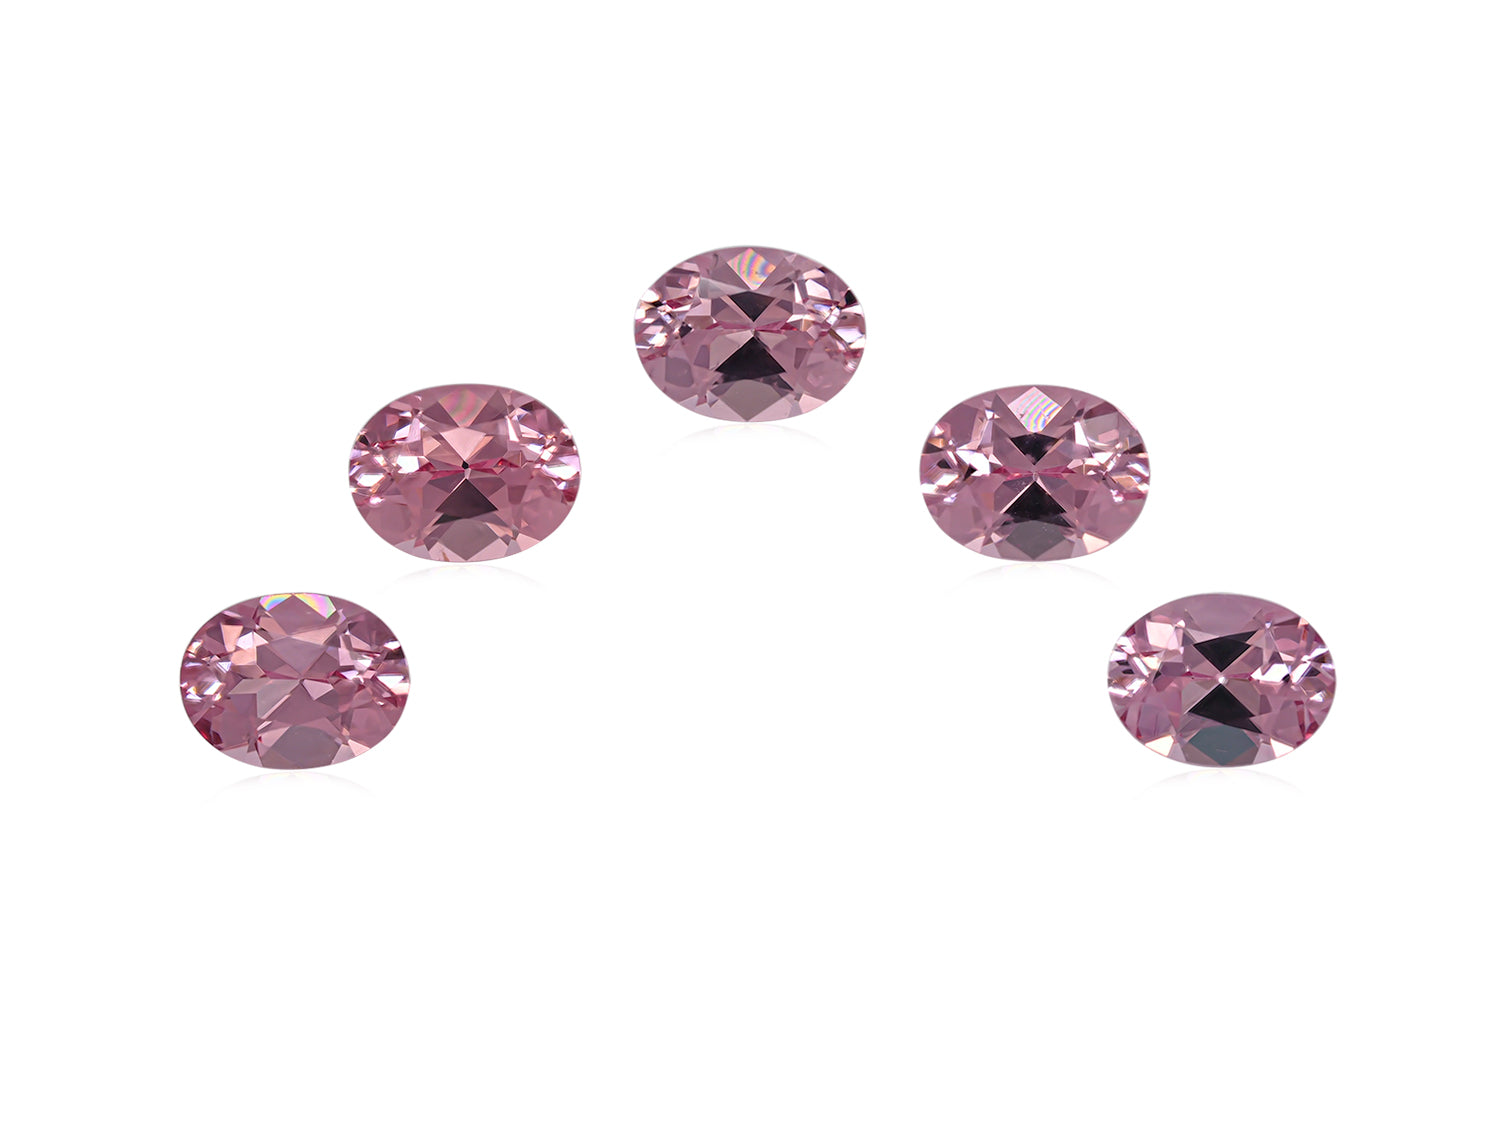 Neon Pink Spinel 3.14 CT / 5